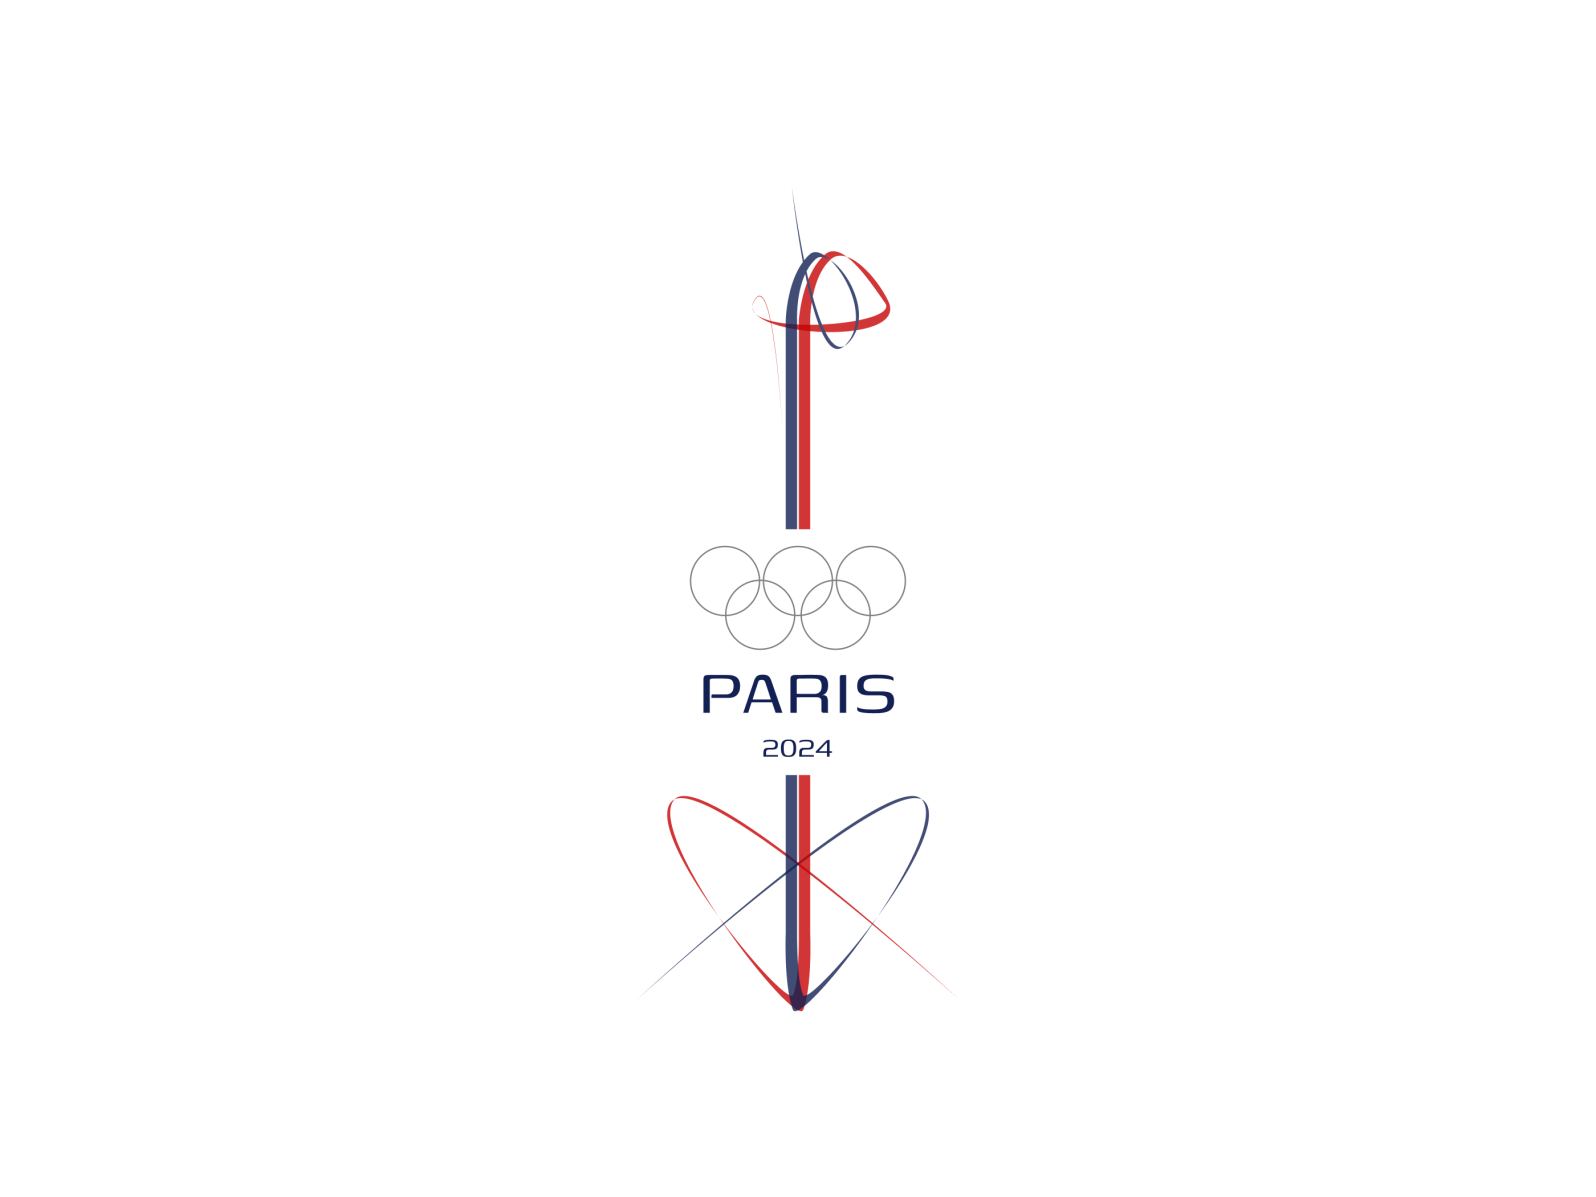 Paris 2024 Olympic Games by Saeid SHARIFY on Dribbble